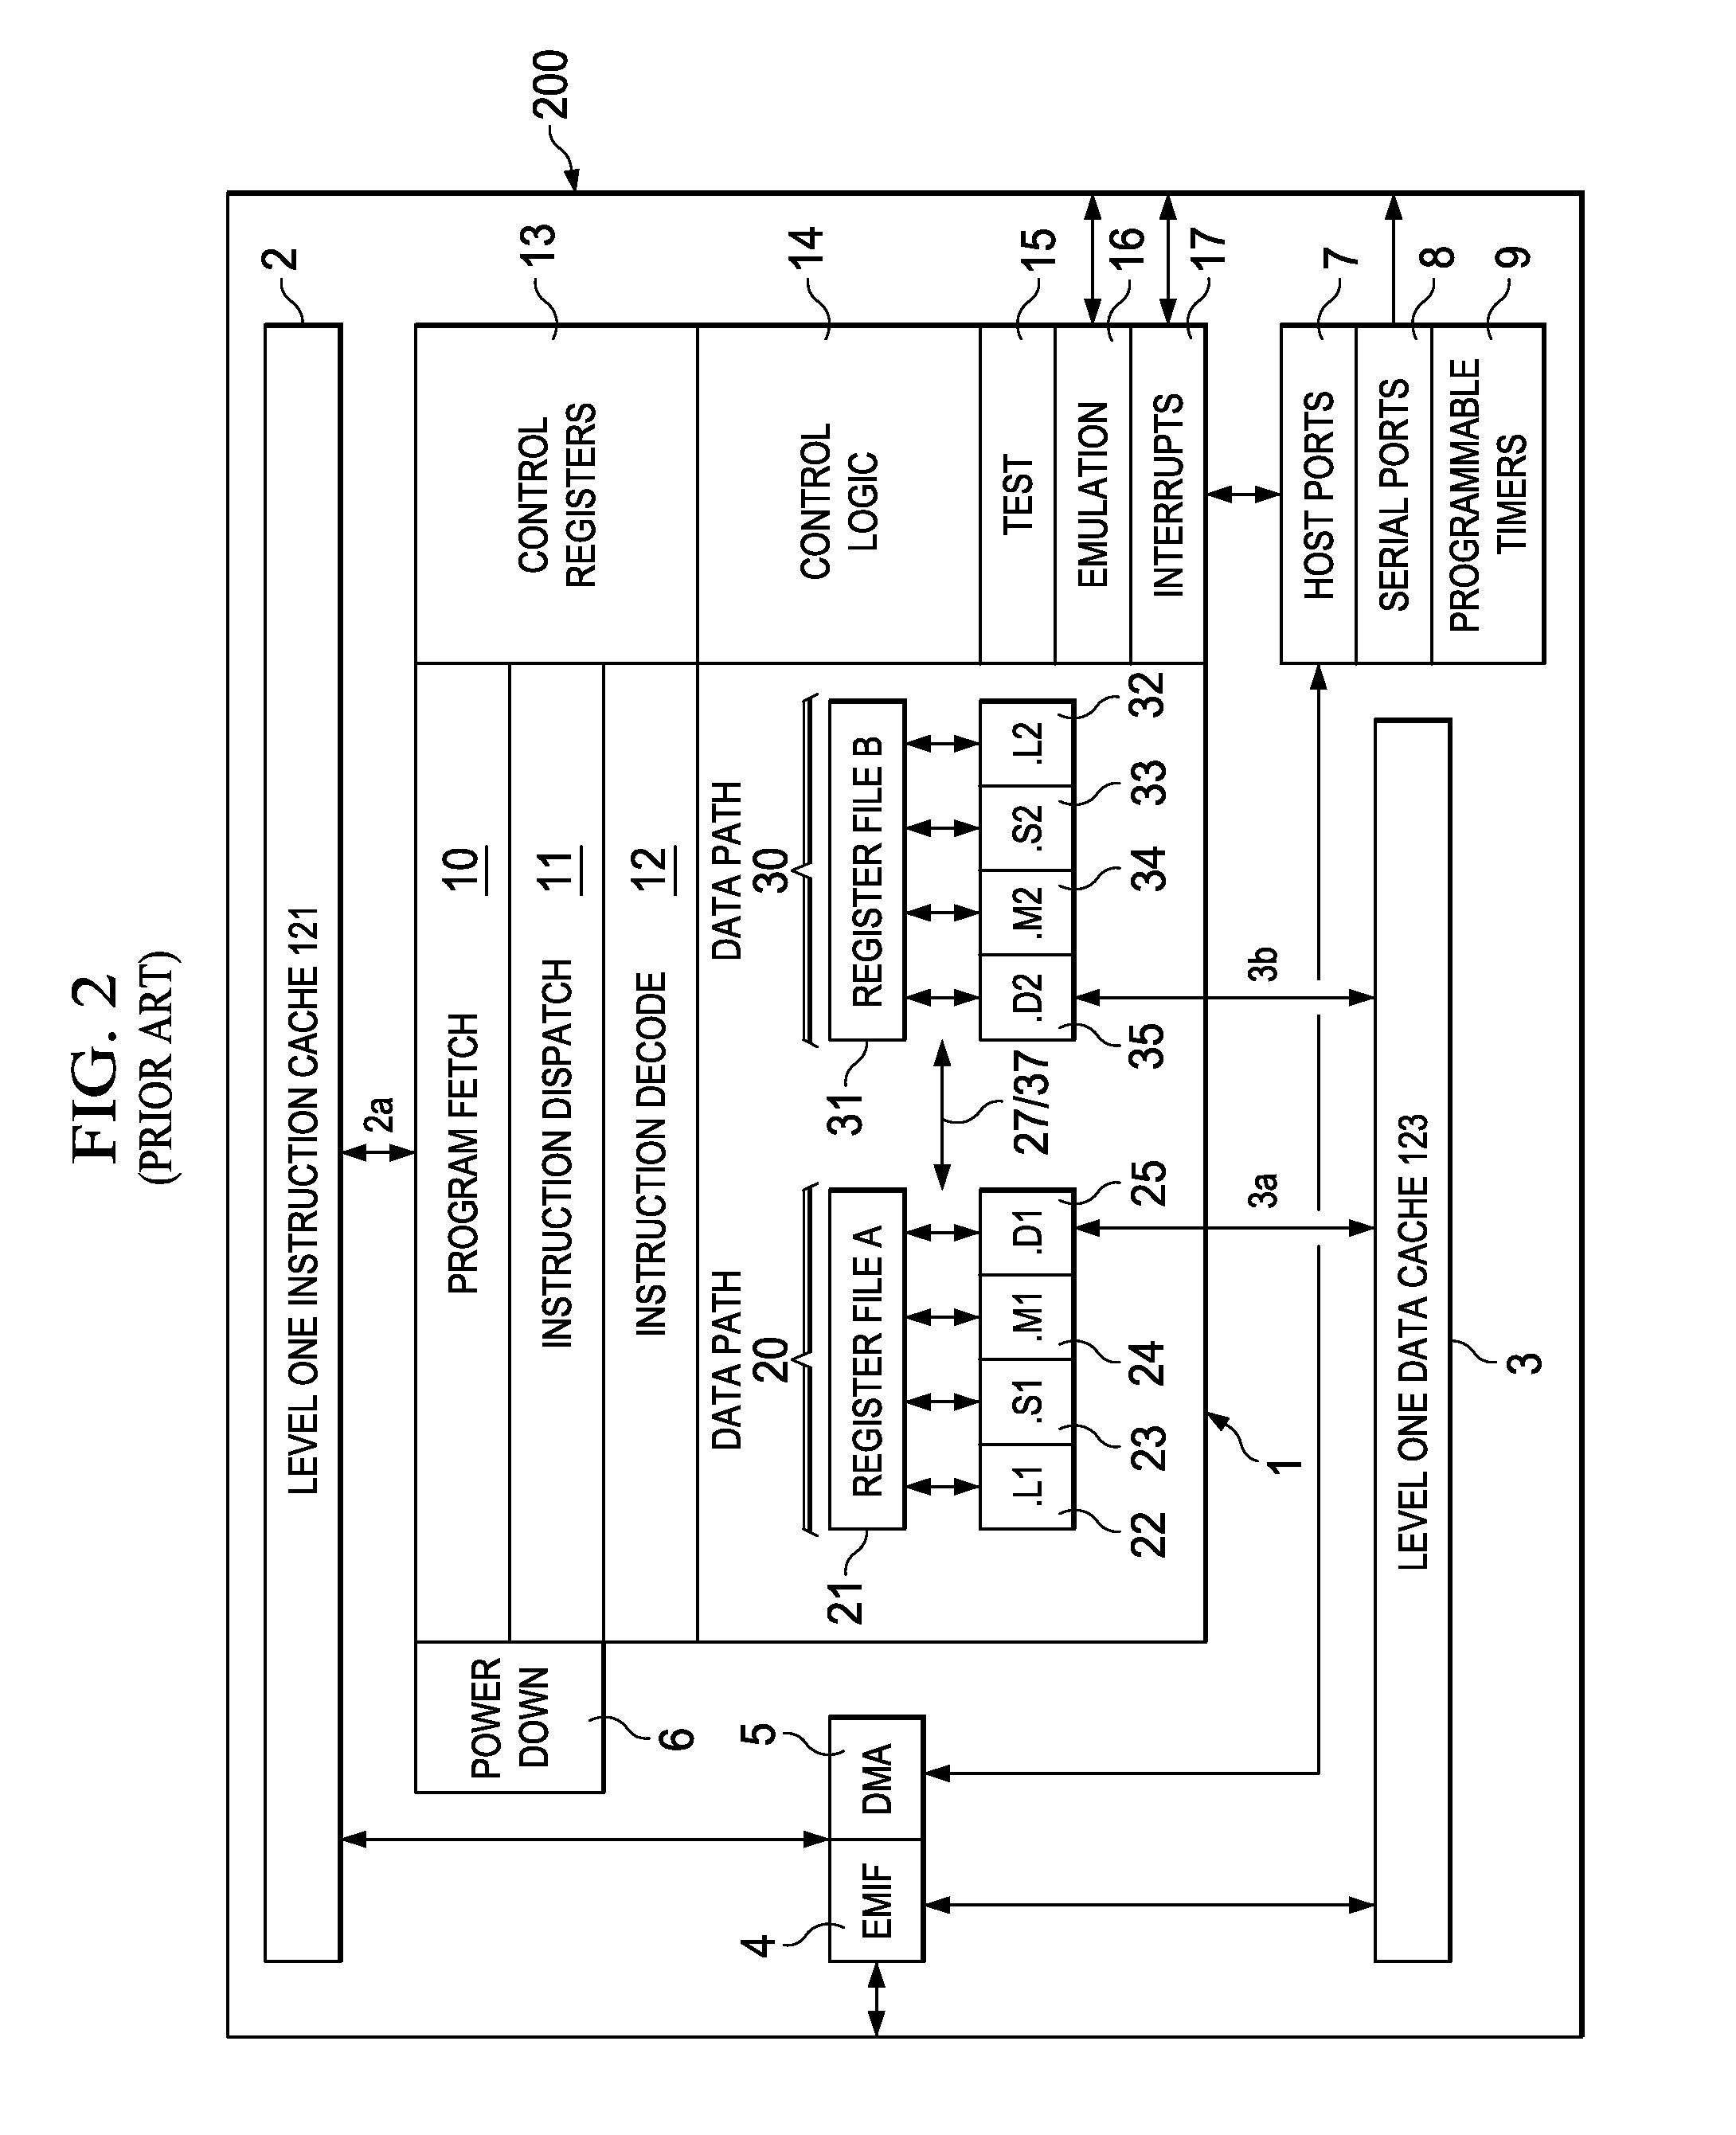 Multi-Master Cache Coherent Speculation Aware Memory Controller with Advanced Arbitration, Virtualization and EDC